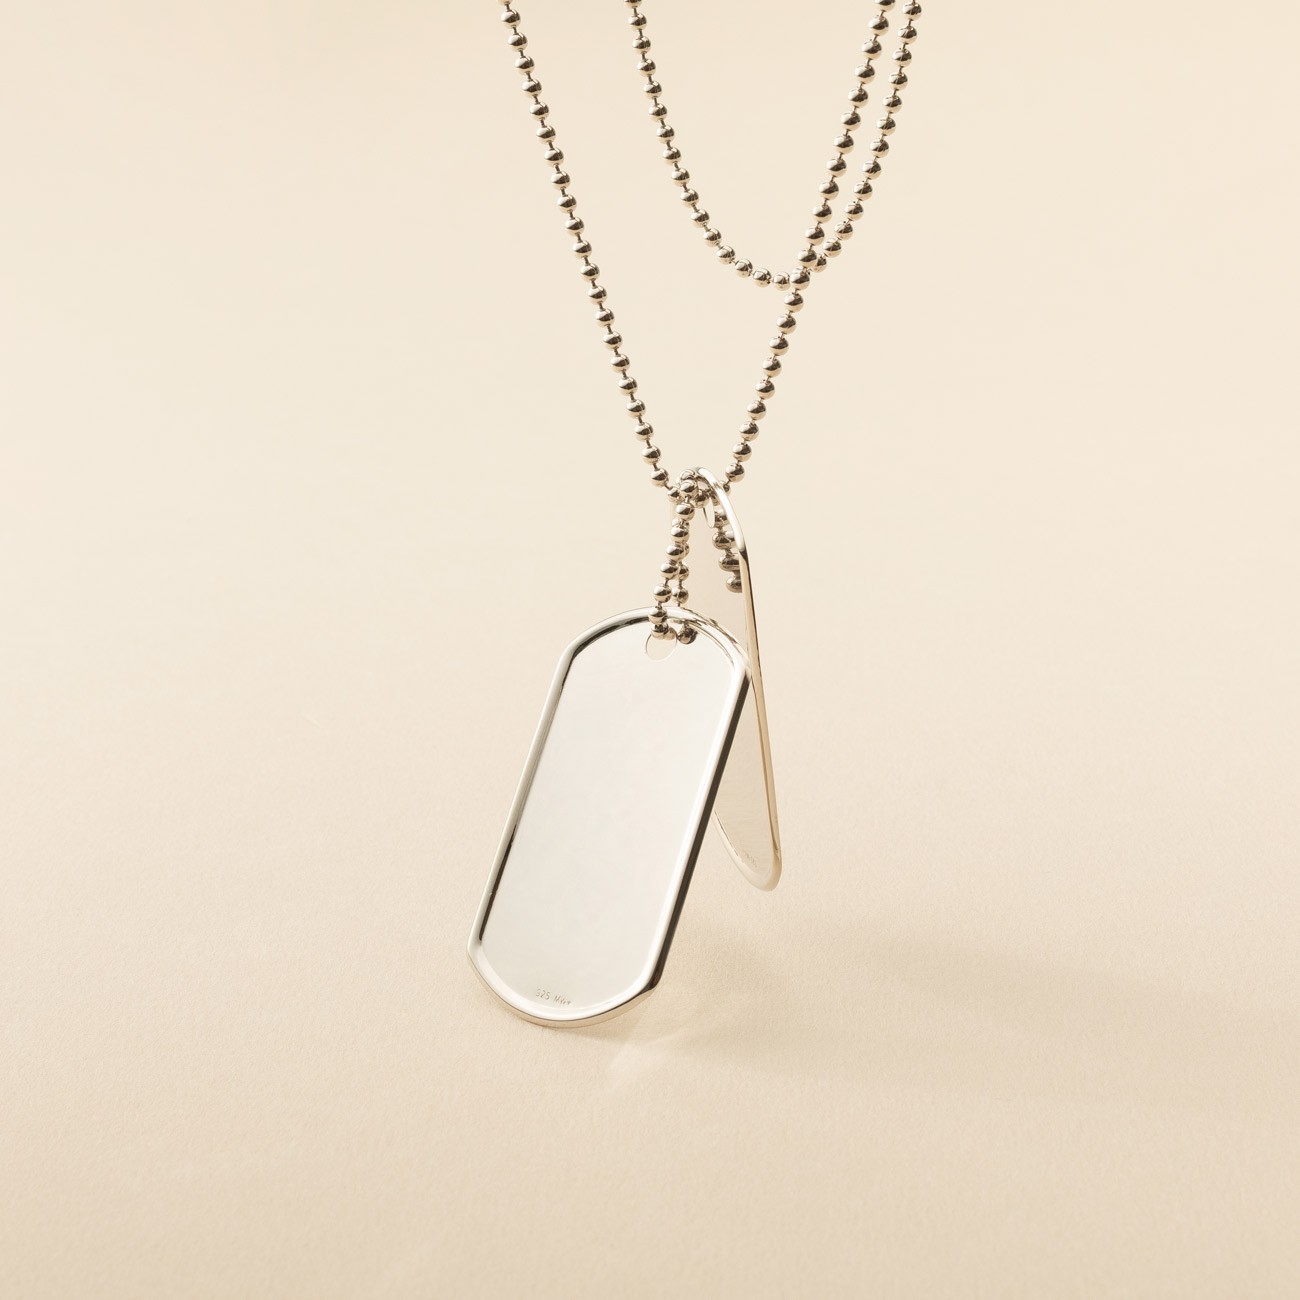 DOG TAG WITH ENGRAVE AND CHAIN SILVER 925,  RHODIUM OR GOLD PLATED